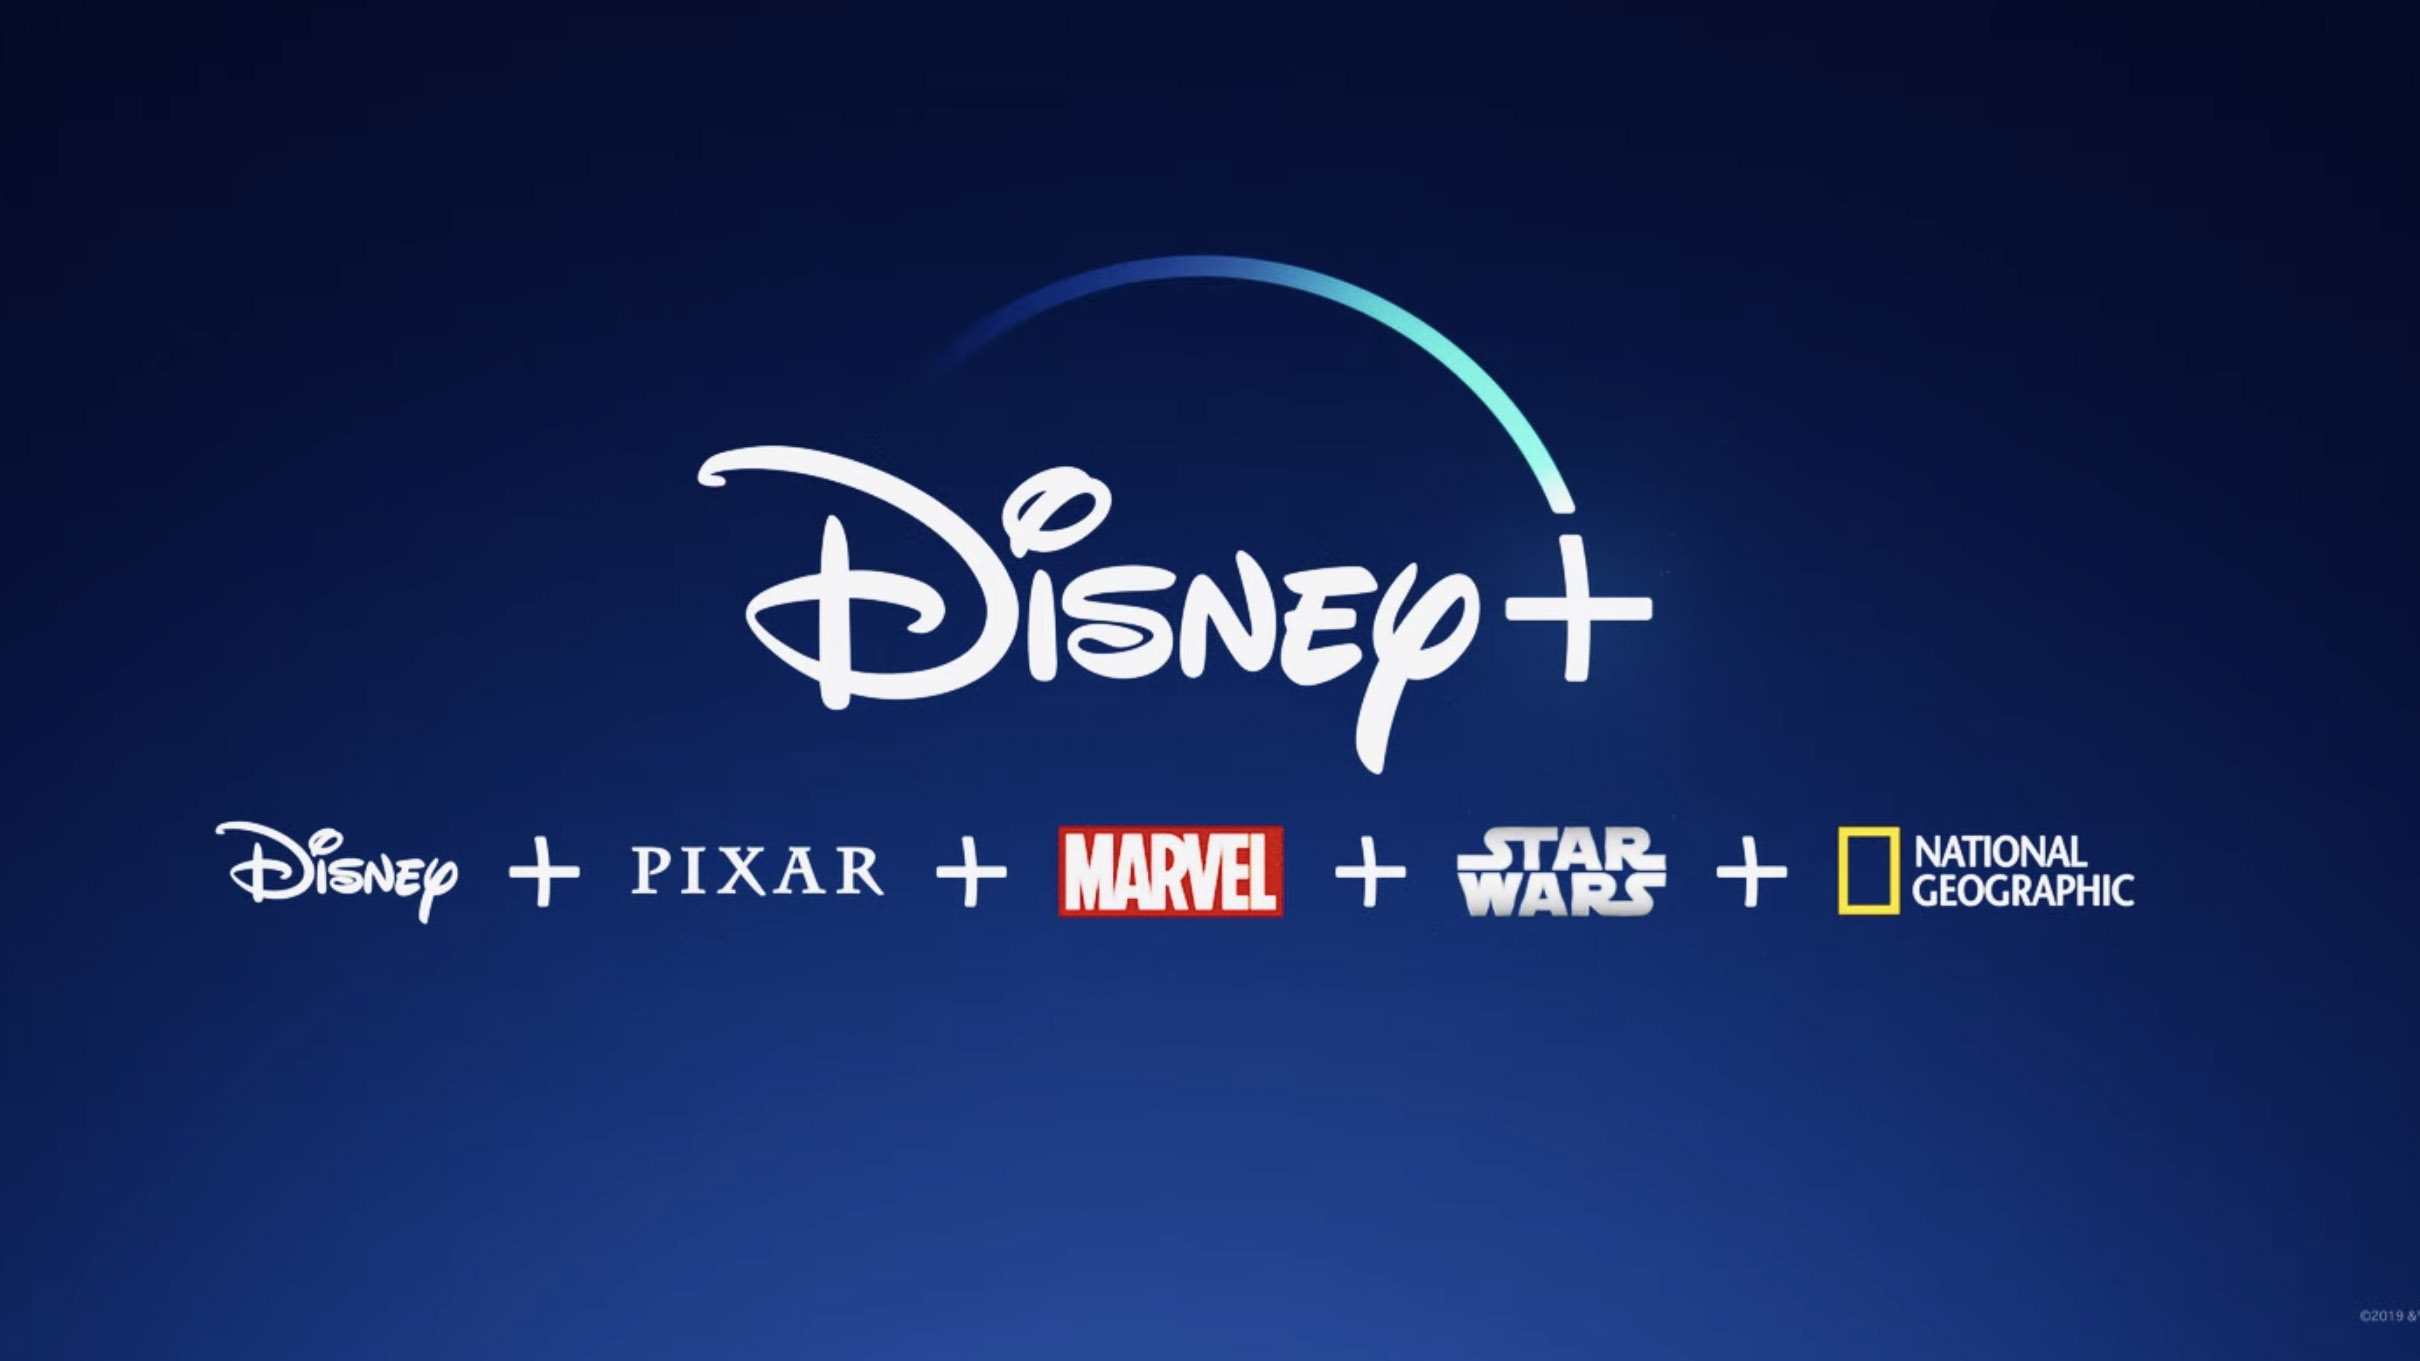 Disney Plus will offer a new type of subscription at a reduced price with ads - NotebookCheck.net News